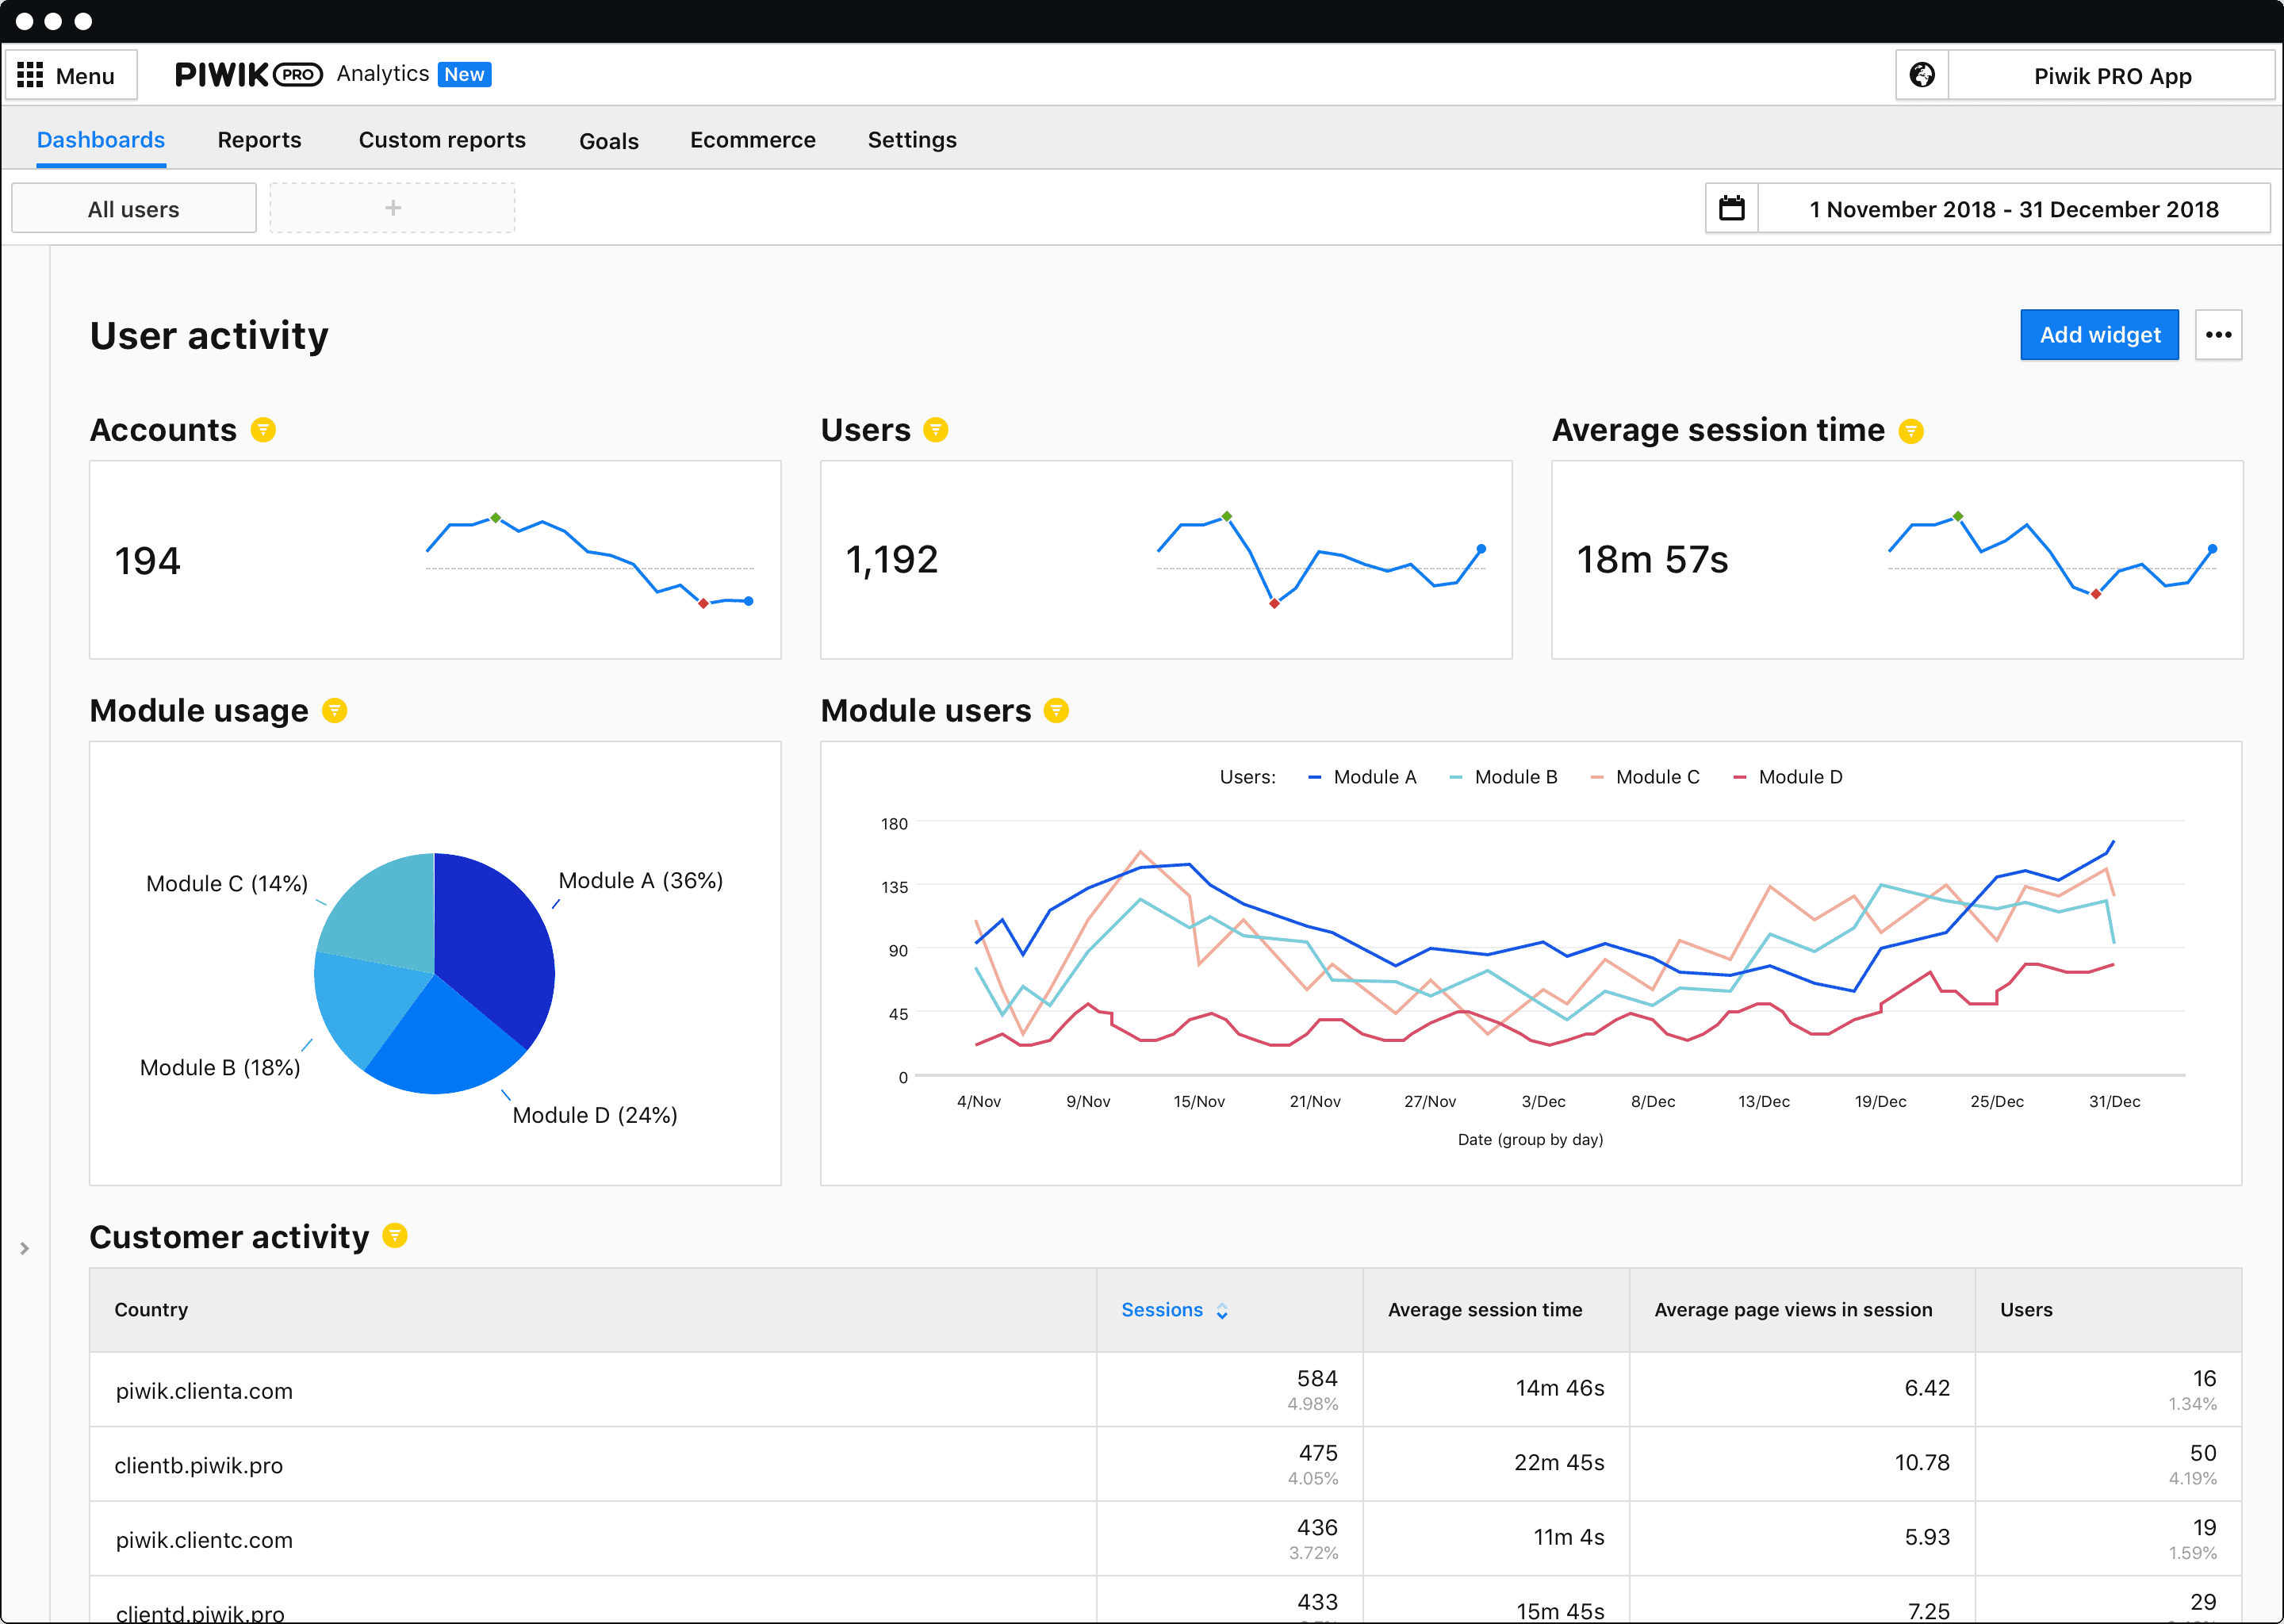 Product Analytics - Dashboards